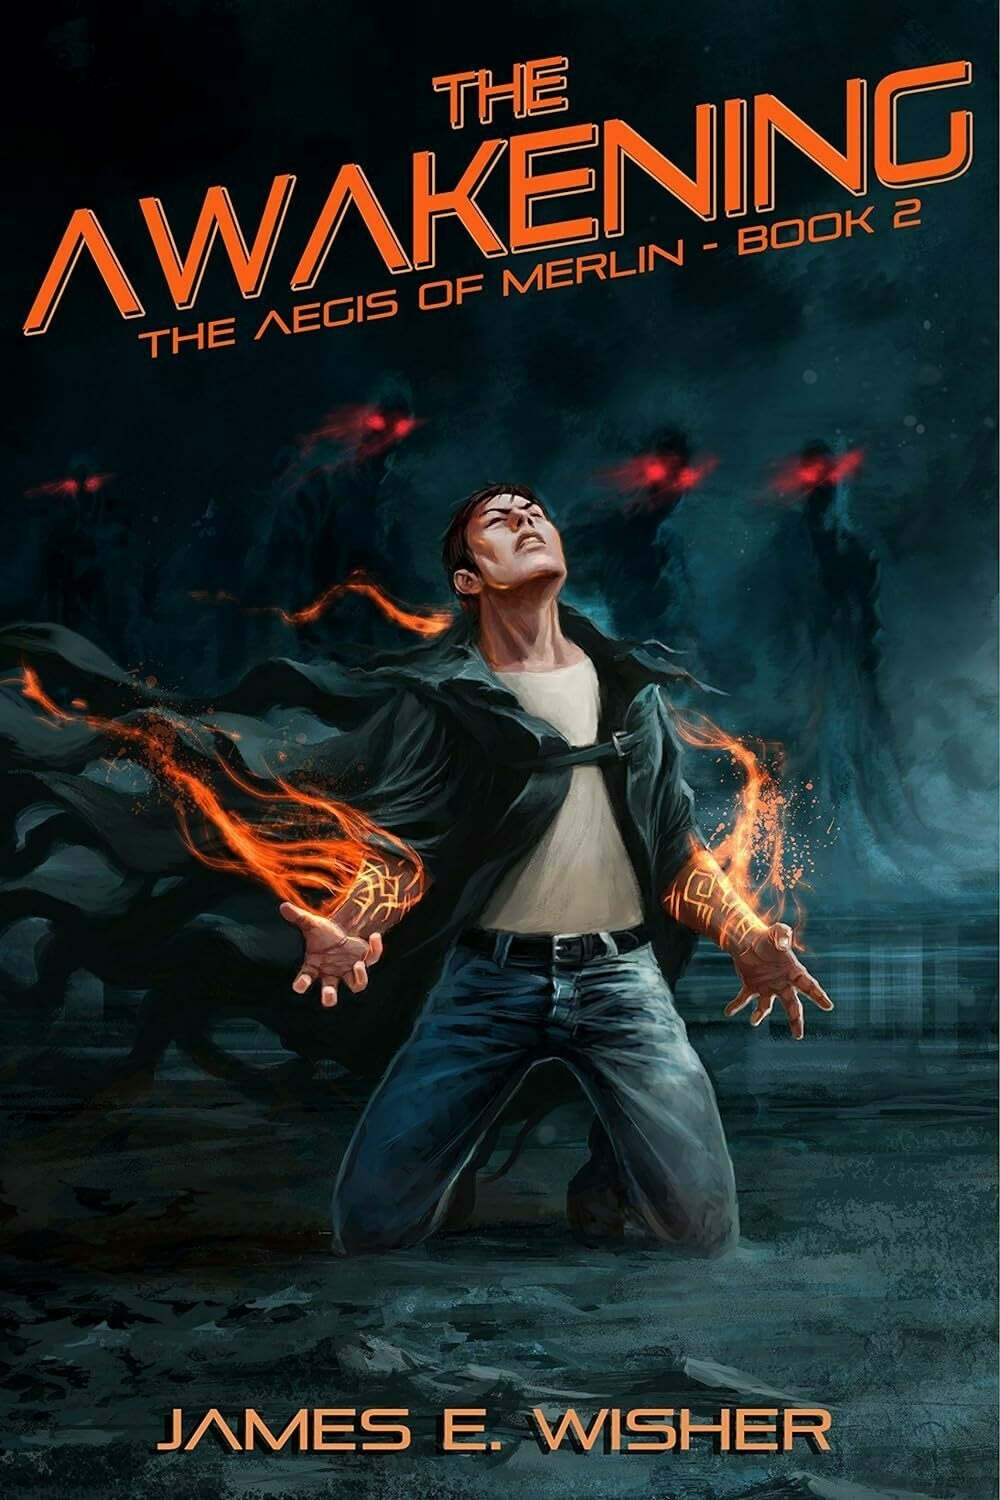 A person stands with arms outstretched, conjuring orange flames from his hands against a dark, stormy backdrop. Text: 'THE AWAKENING THE AEGIS OF MERLIN - BOOK 2 JAMES E. WISHER'.